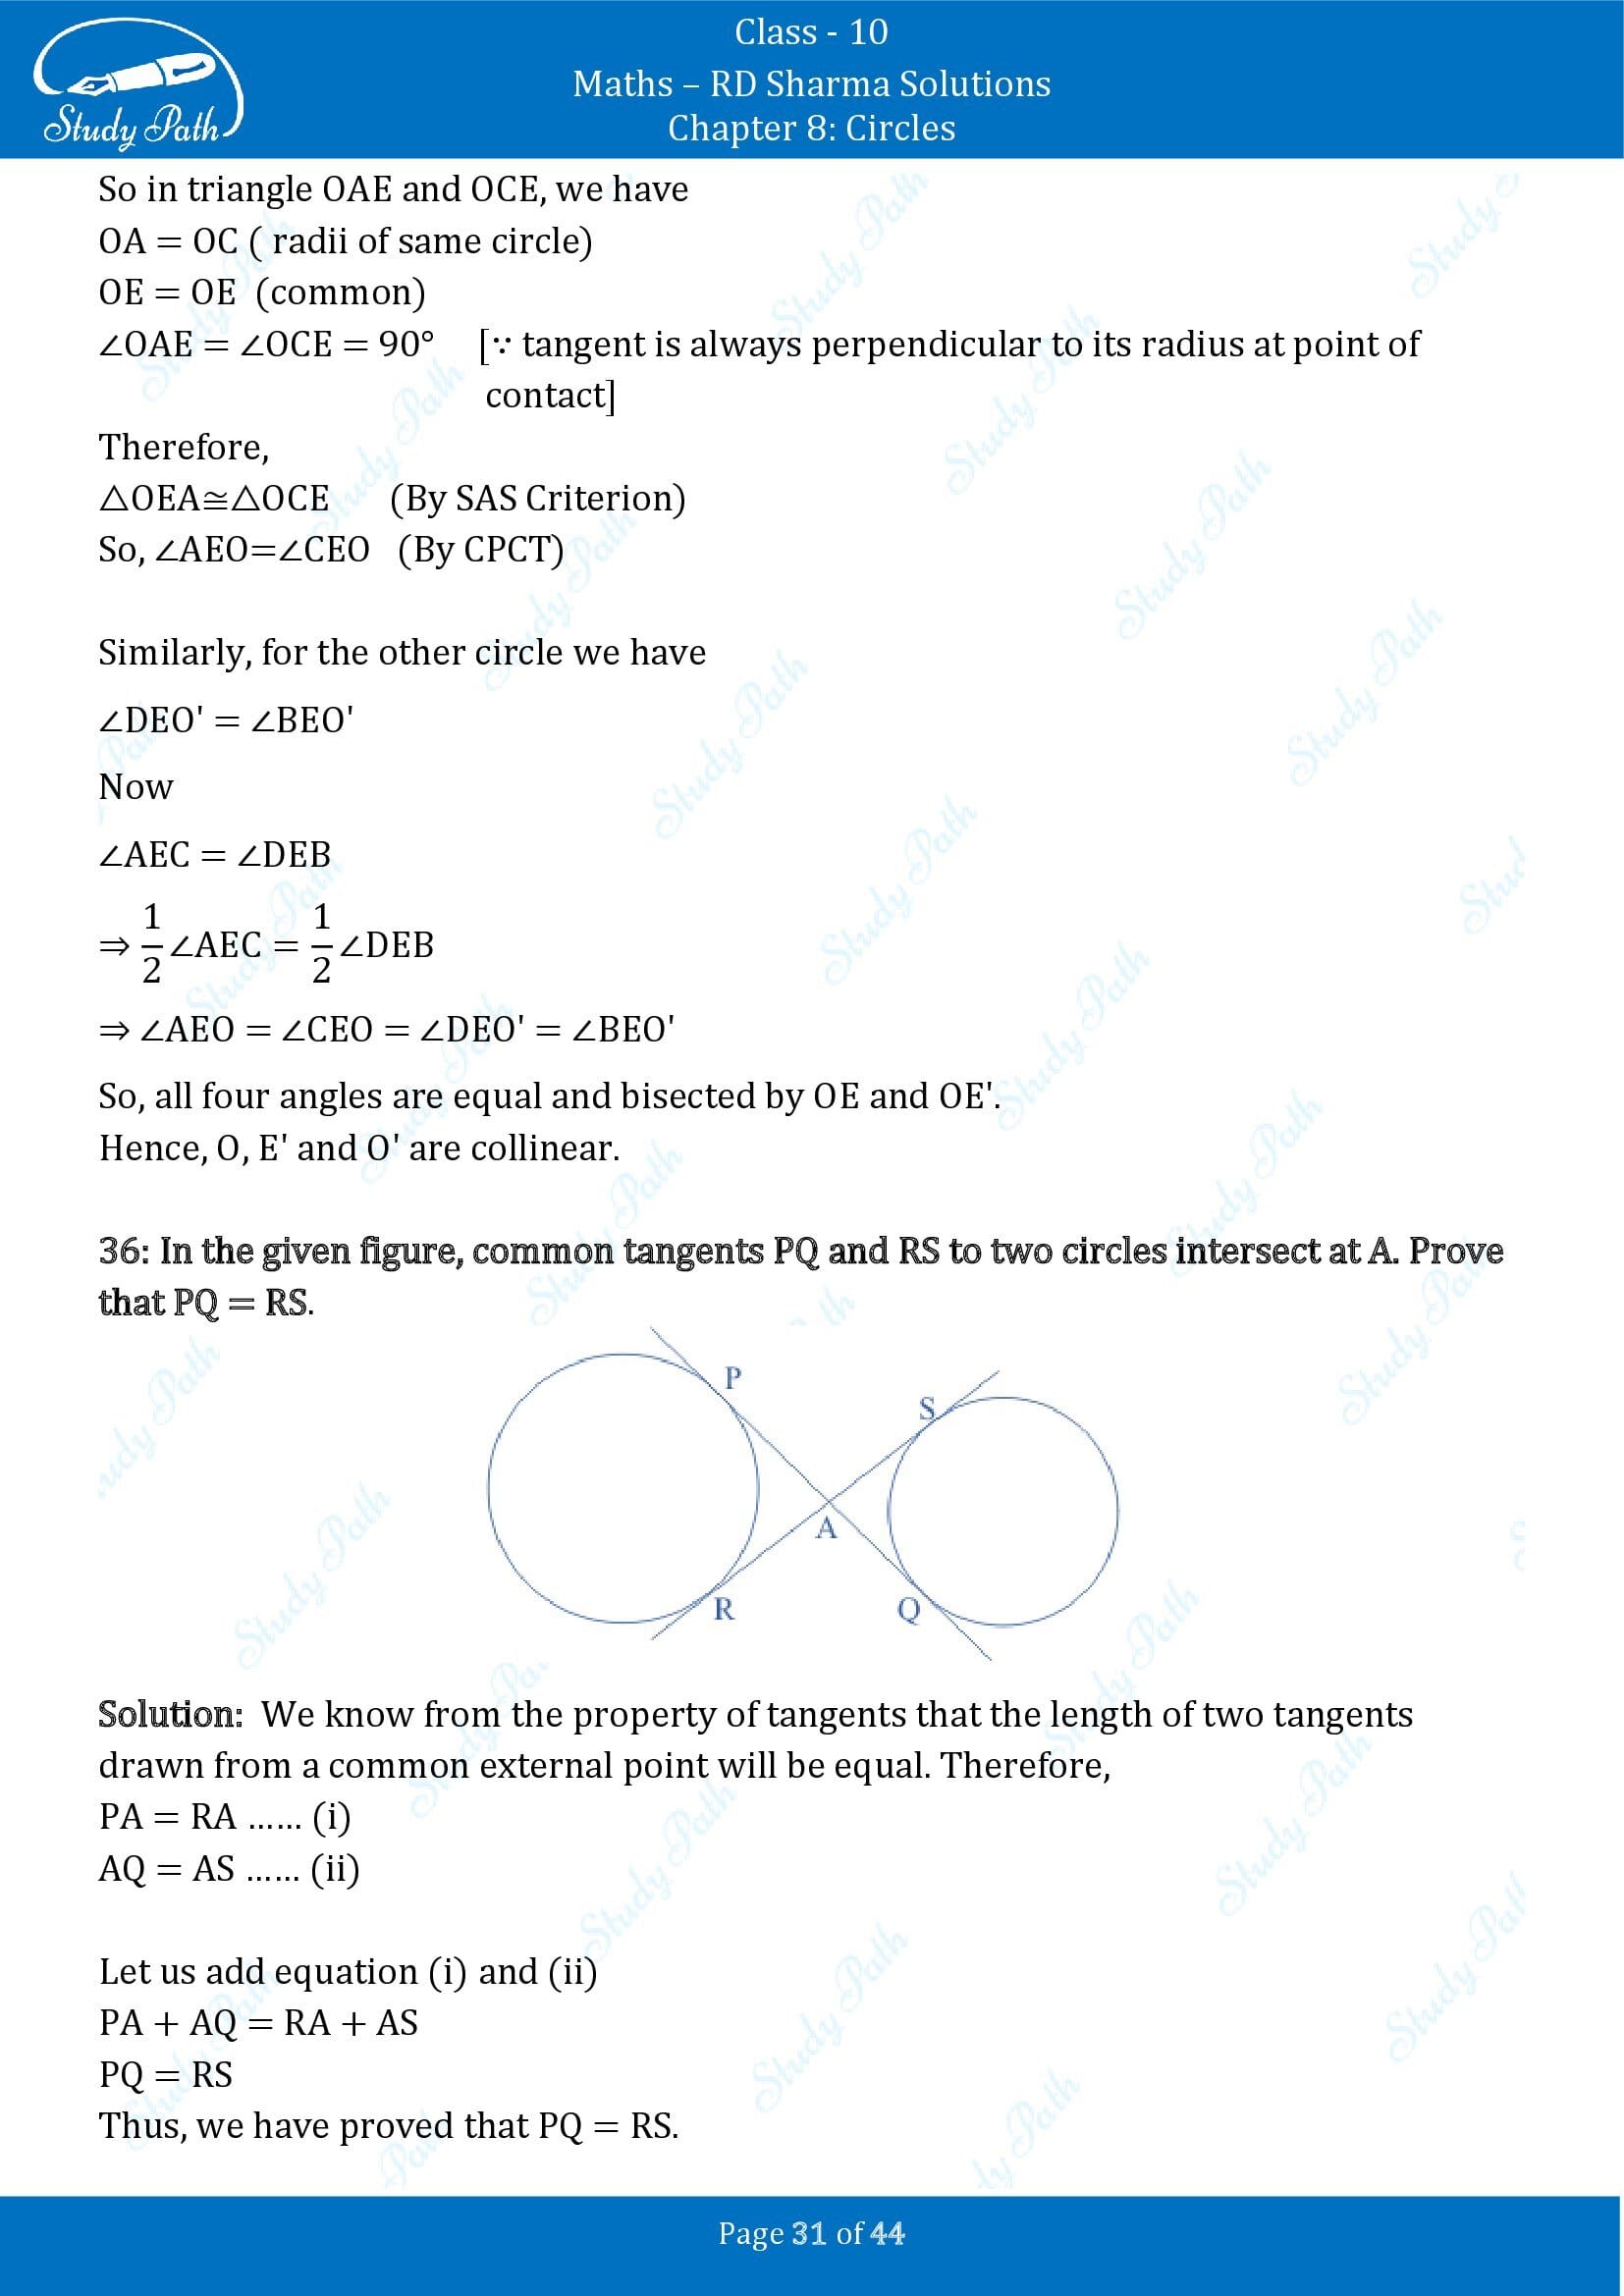 RD Sharma Solutions Class 10 Chapter 8 Circles Exercise 8.2 00031